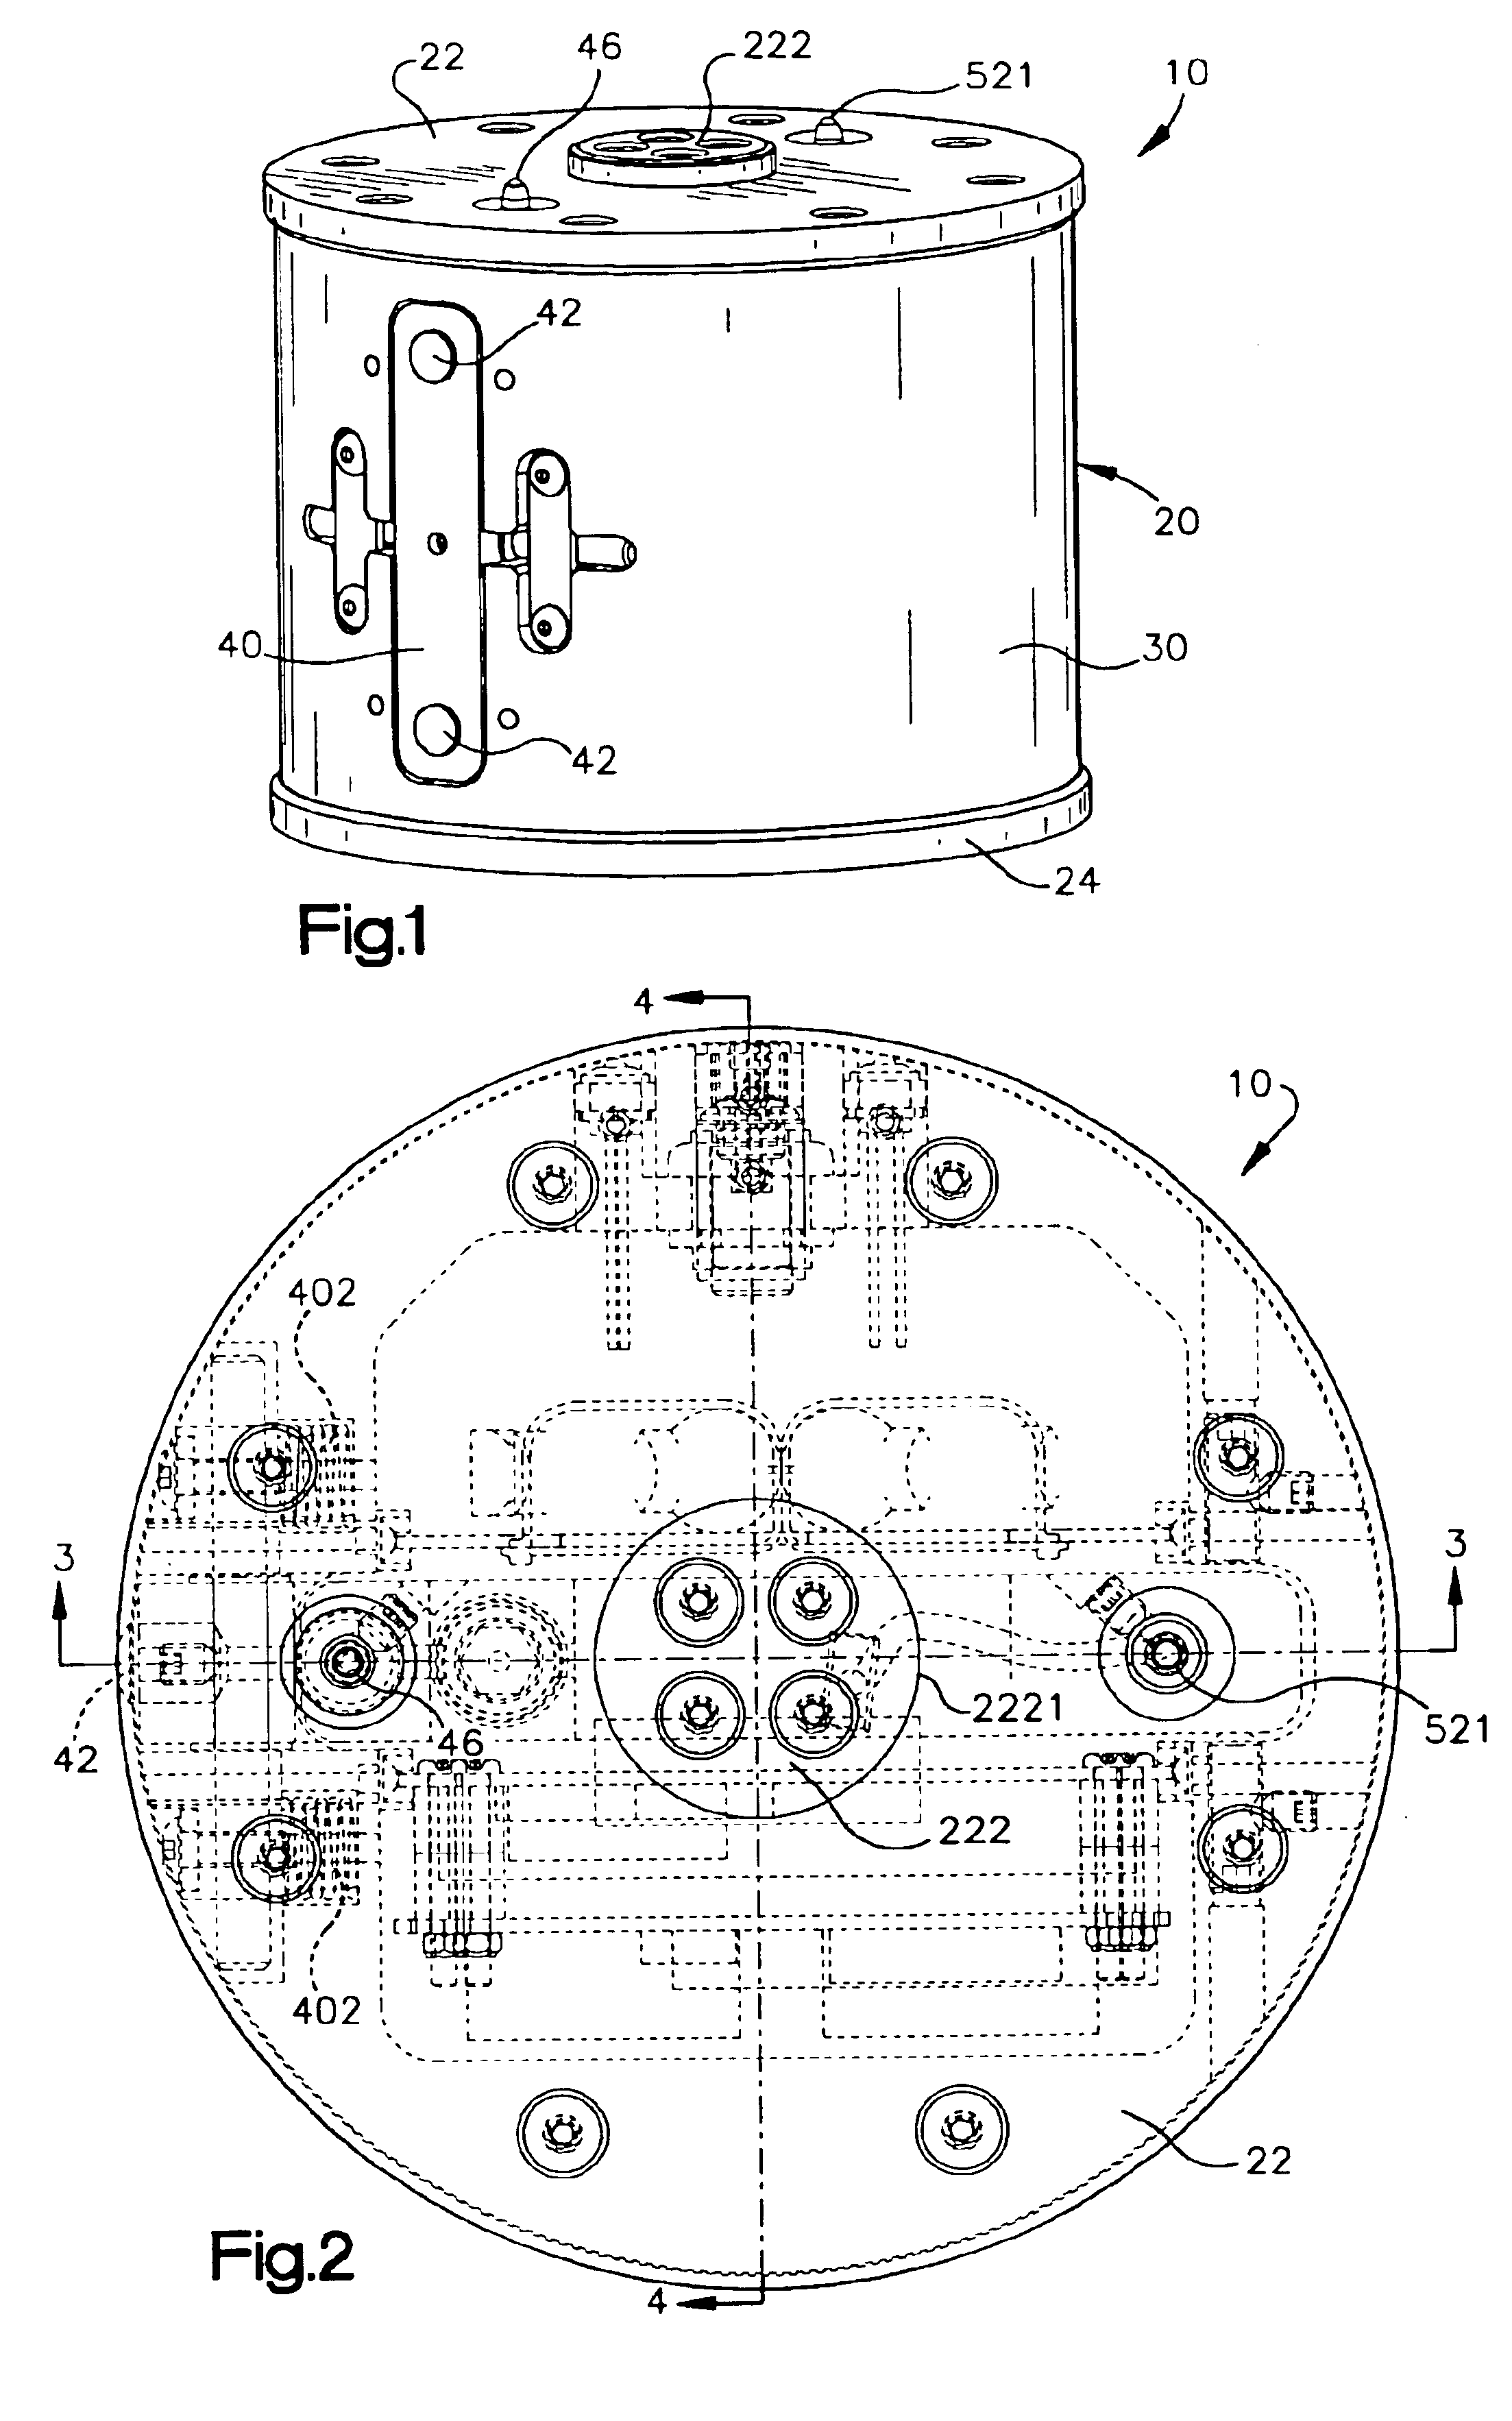 Devices and methods for applying known resistance loads and measuring internal angles of gyration in gyratory compactors